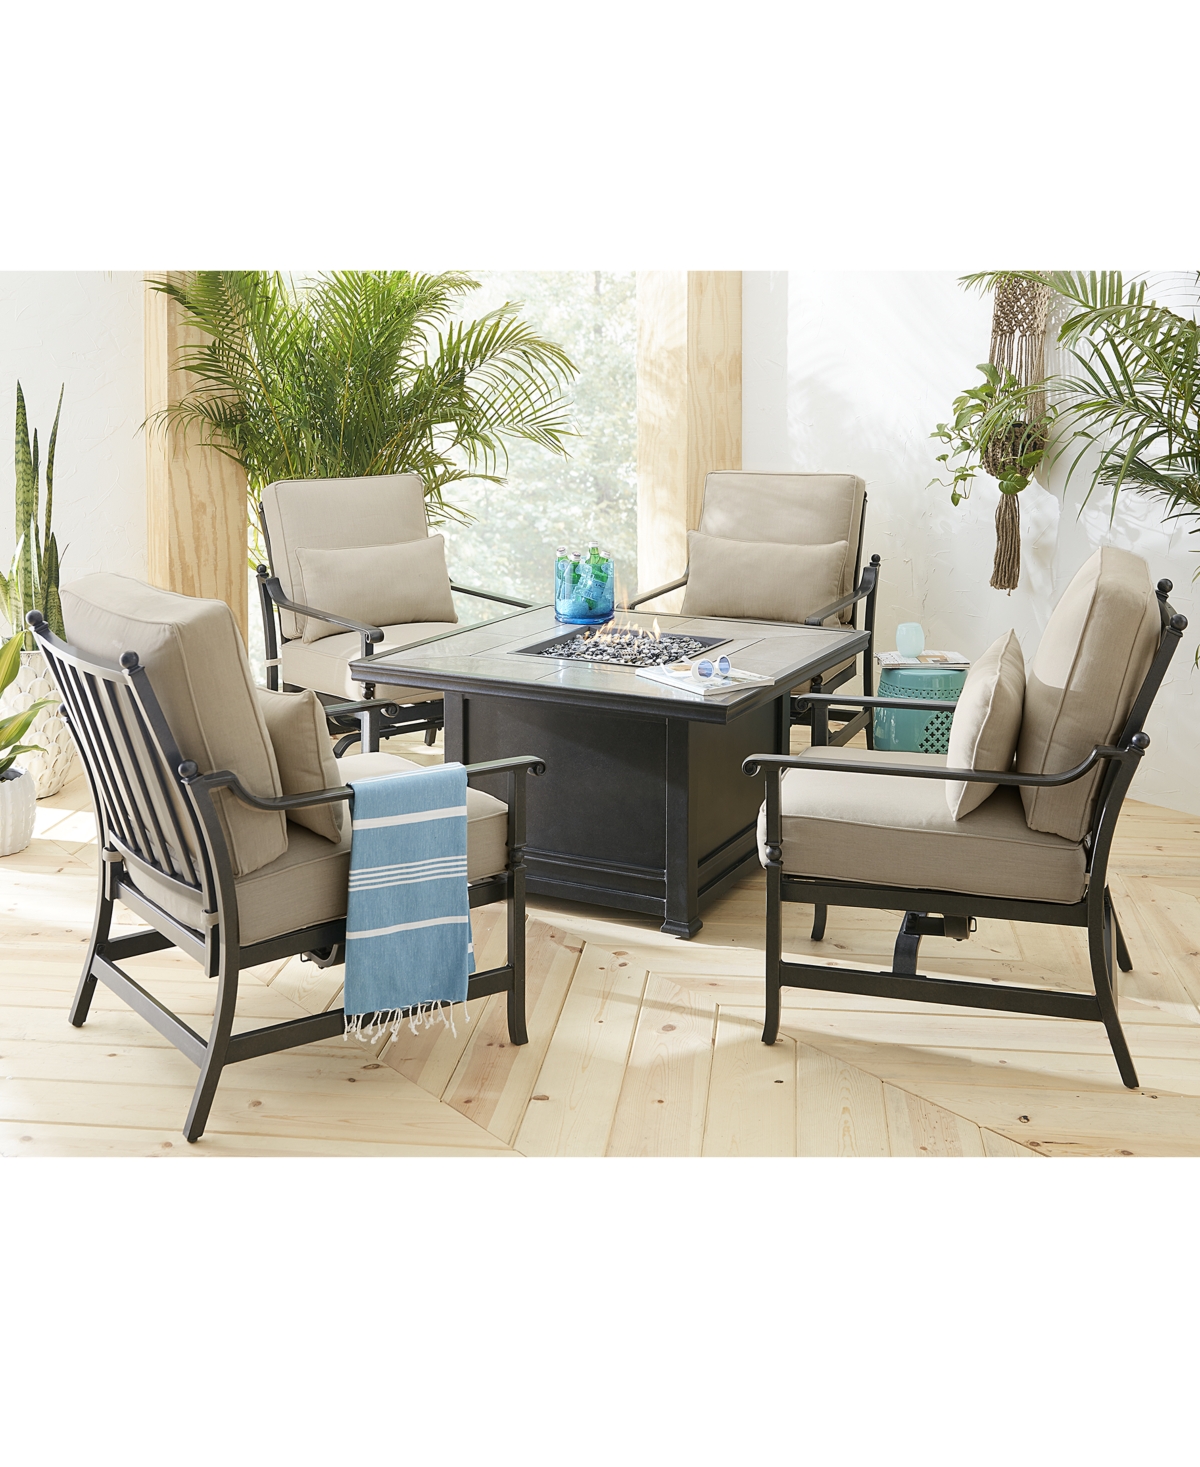 Amsterdam Outdoor 5-Pc. Chat Set (1 Fire Pit & 4 Rocker Club Chairs), Created for Macys